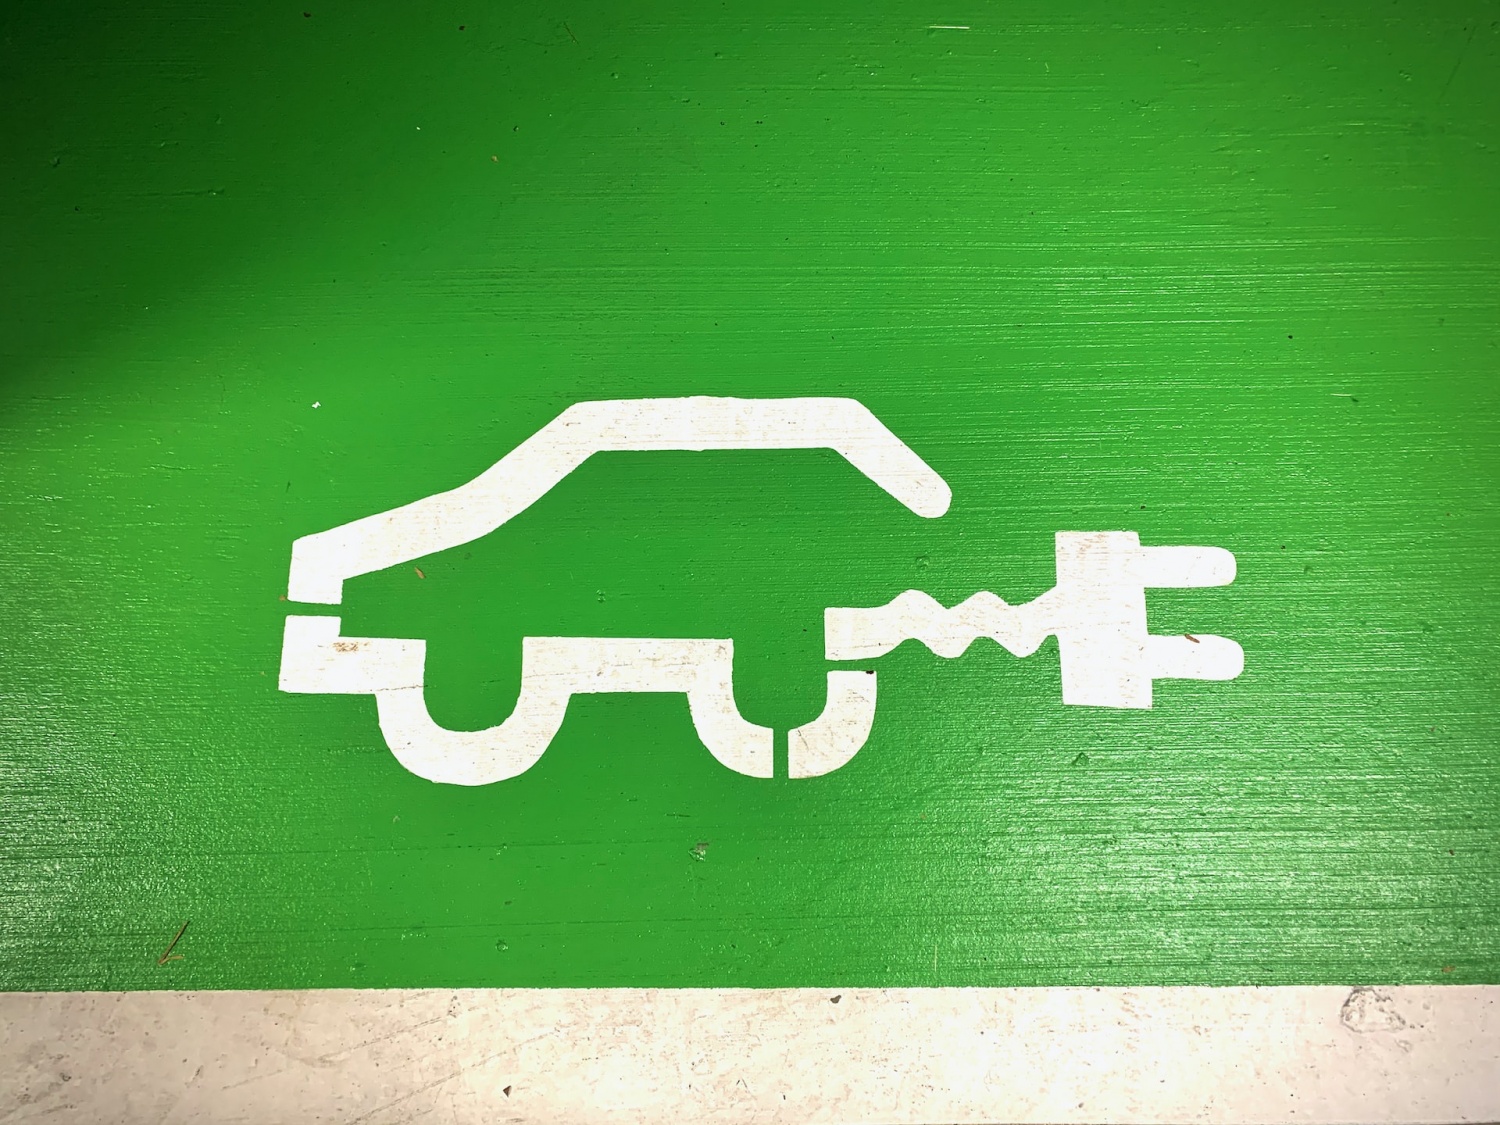 Whistleblower Reveals that Plug-in Hybrid Units Use More Gas than Initial Estimates